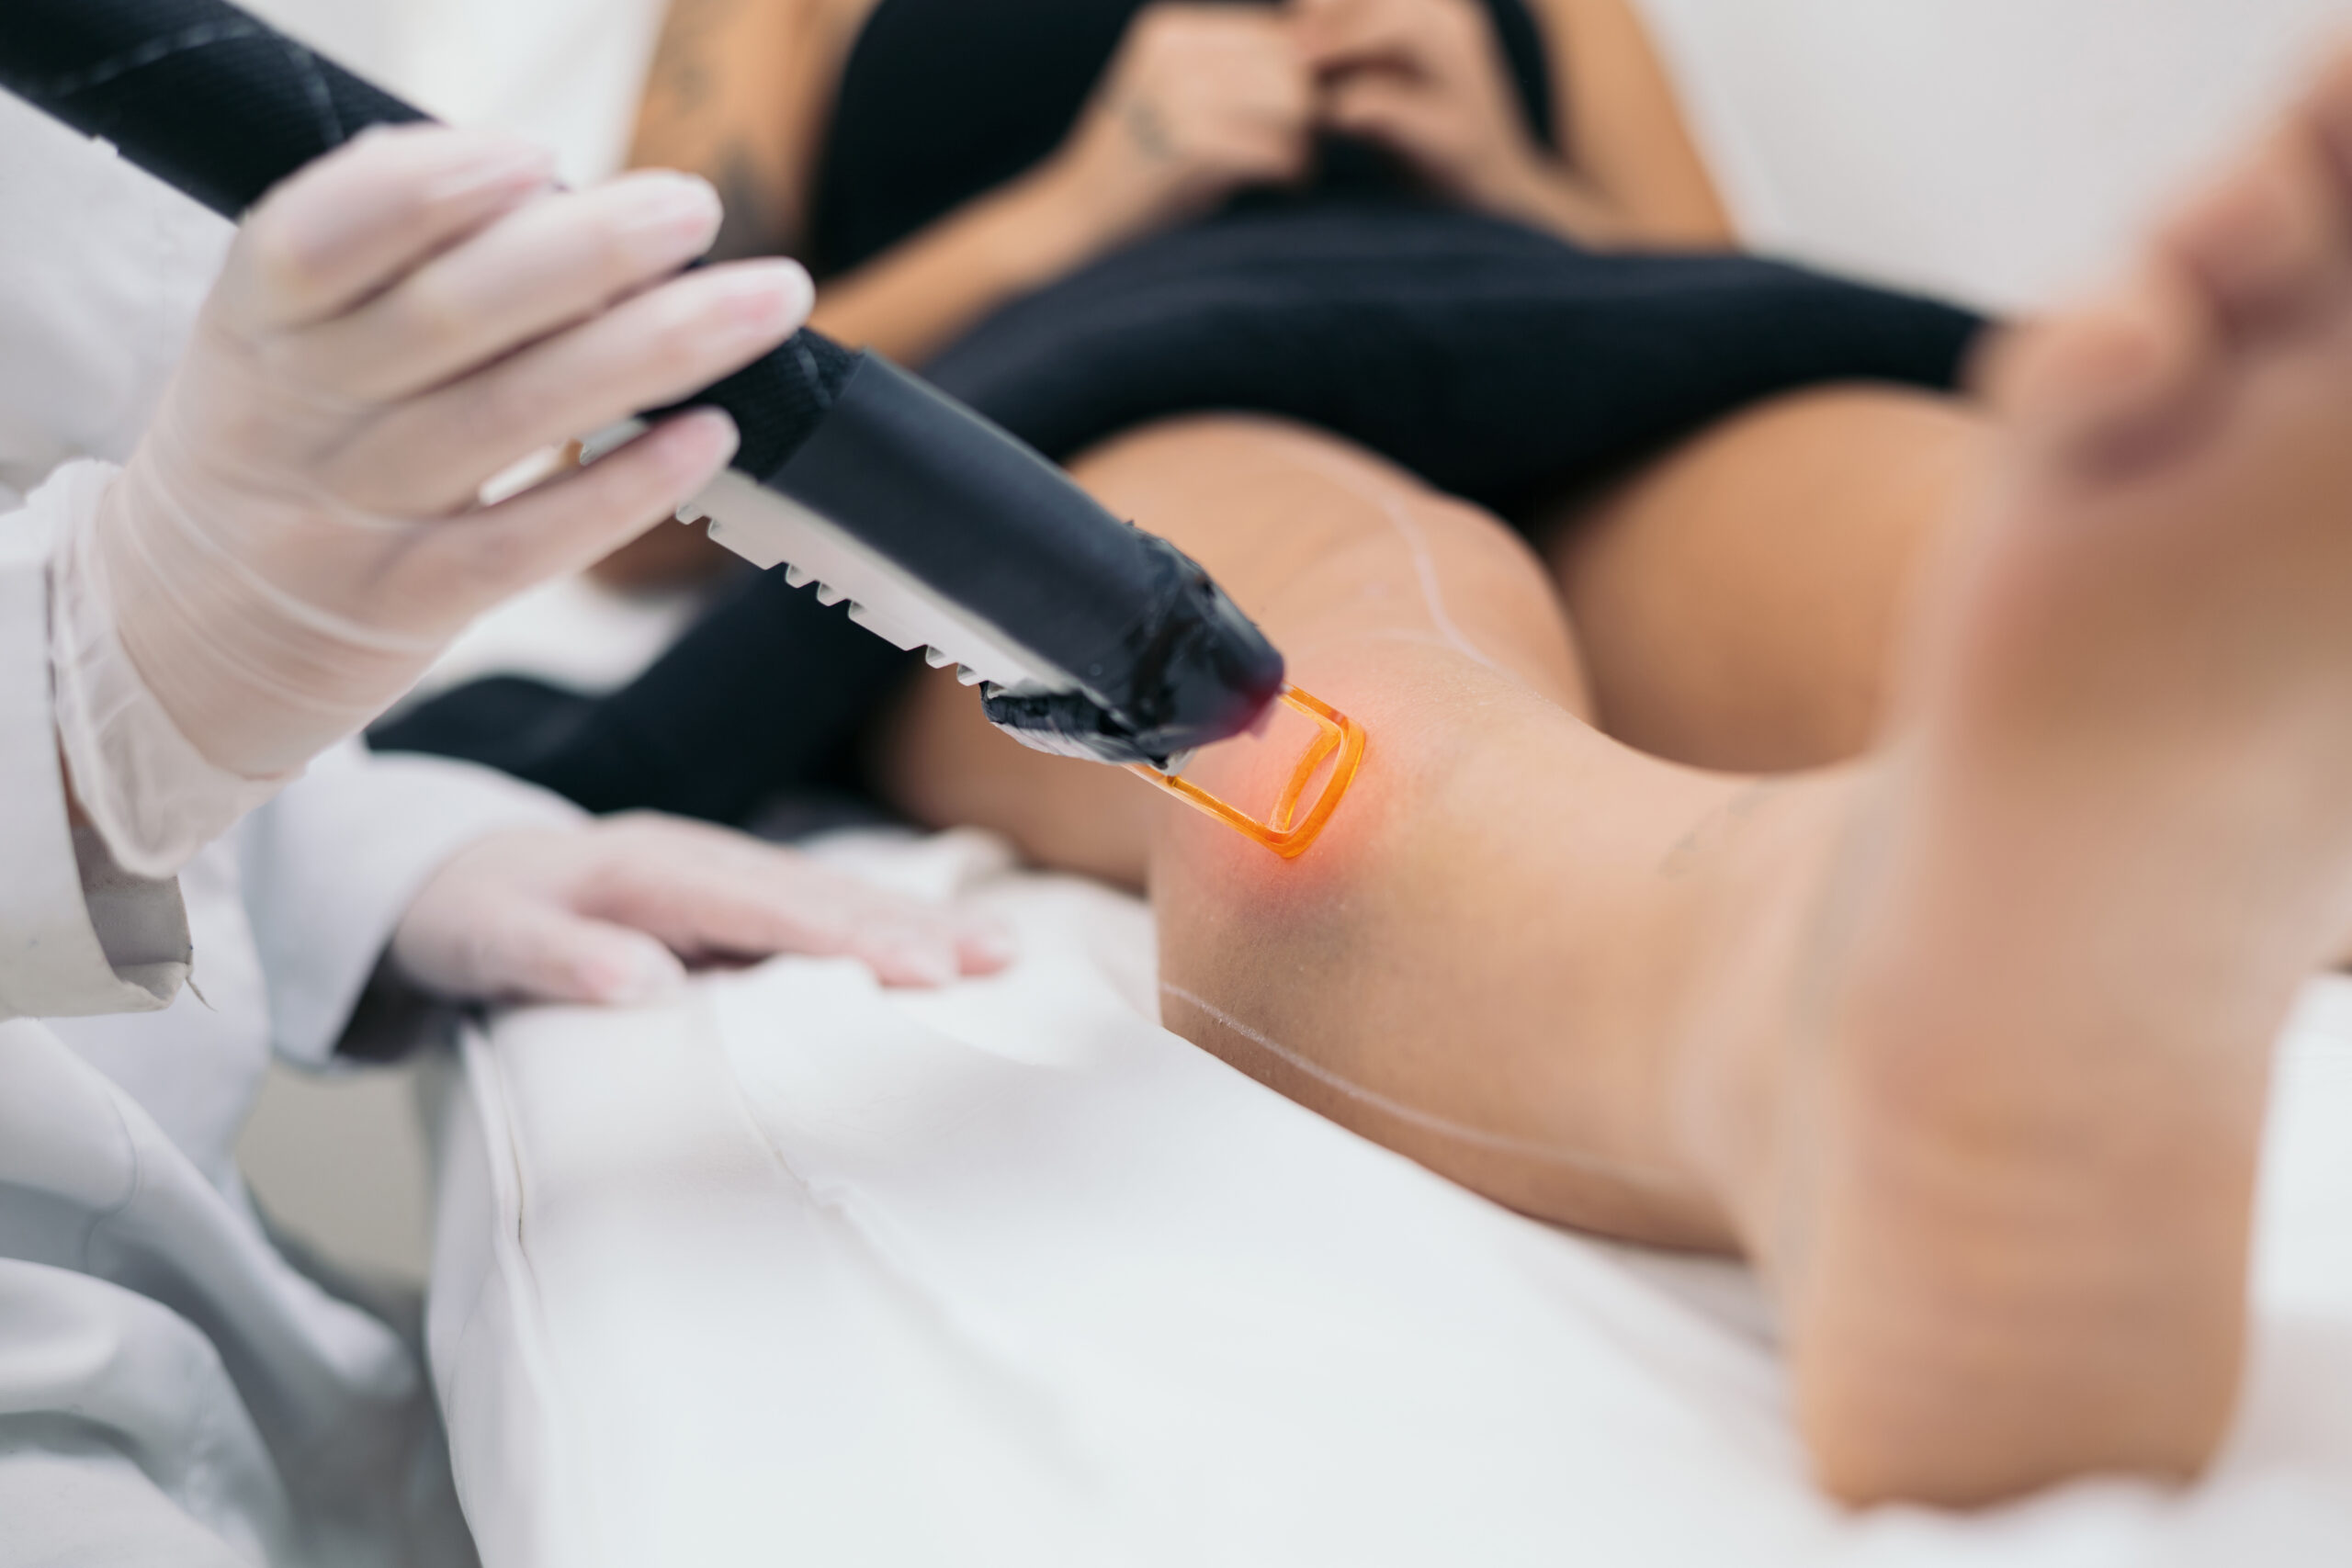 a woman during laser hair removal, laser hair removal on the legs in the beauty center. Concept of laser hair removal, concept of caring for oneself. Aesthetic clinic.